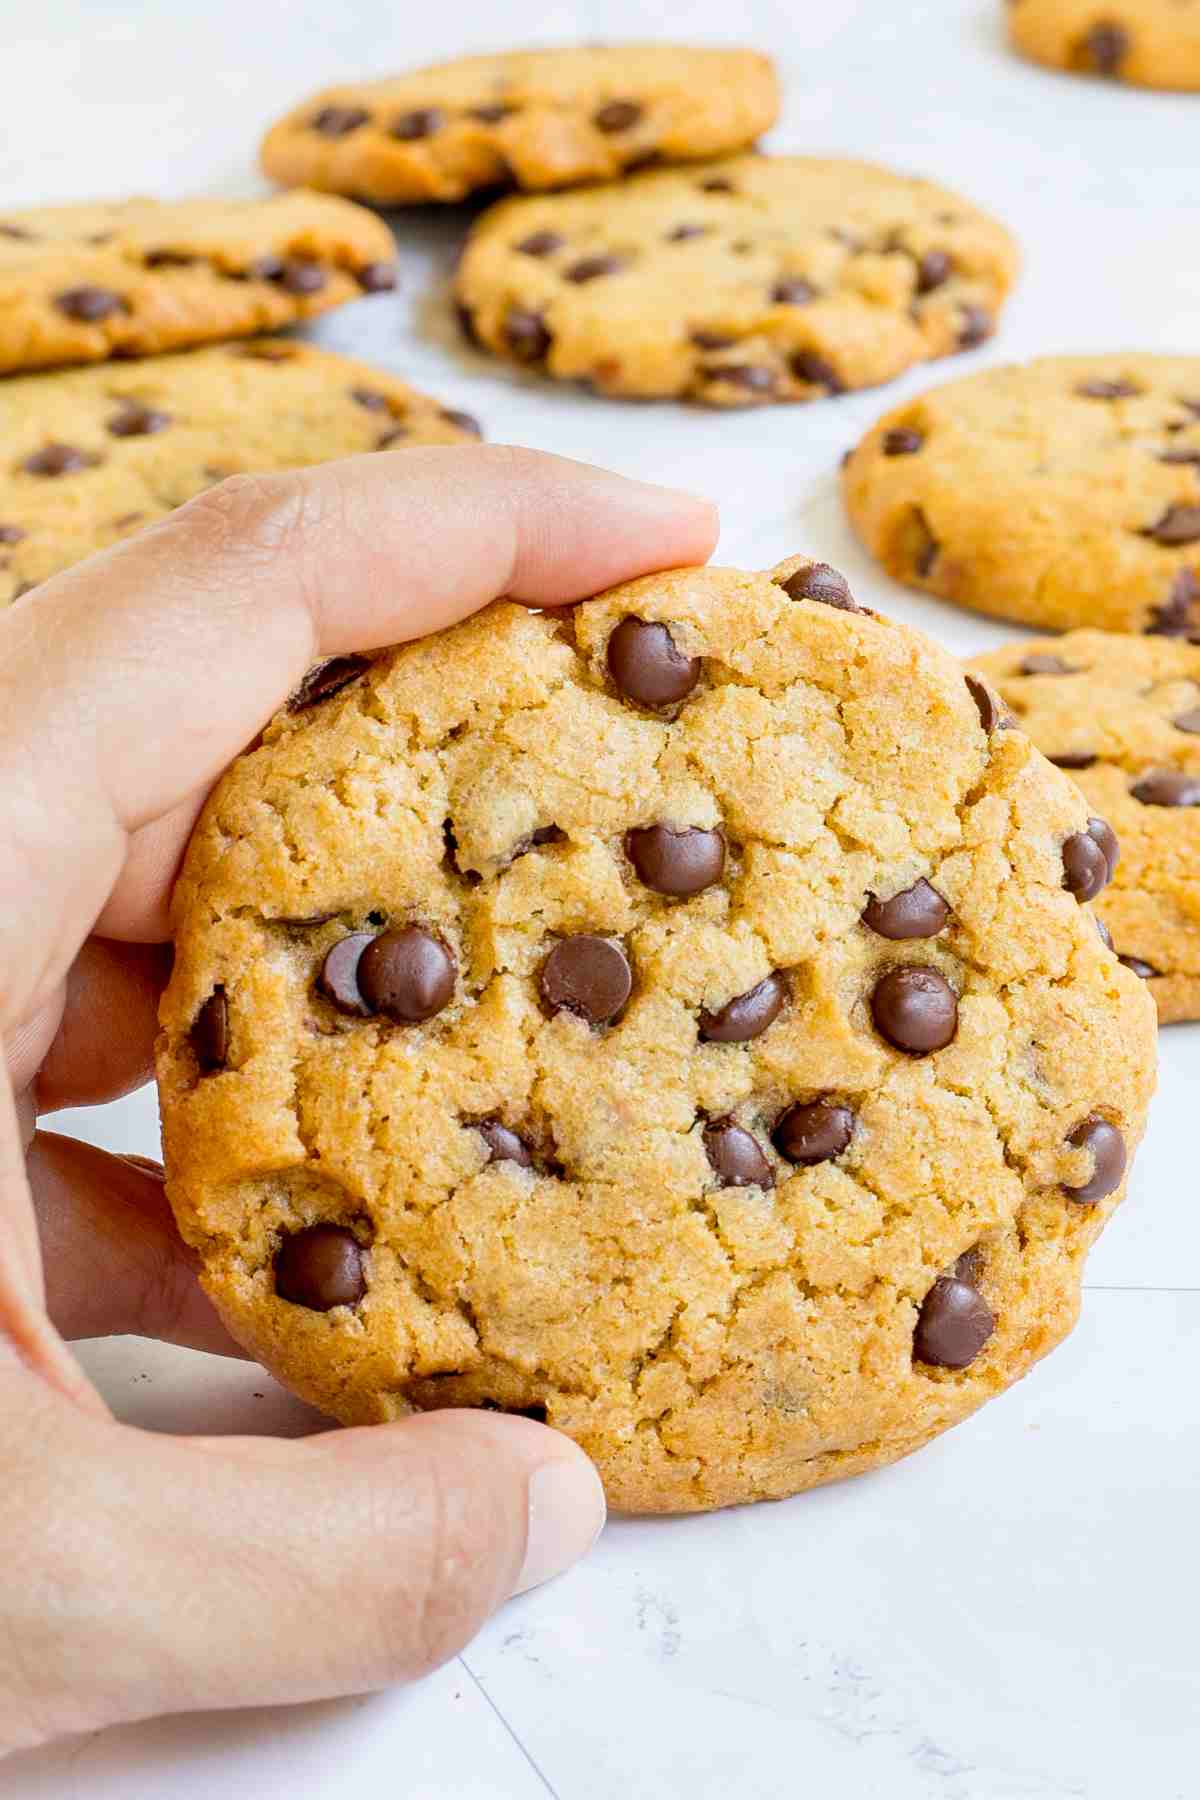 Lots of chocolate chip cookies on a white wooden surface. A hand is holding one up in the front.